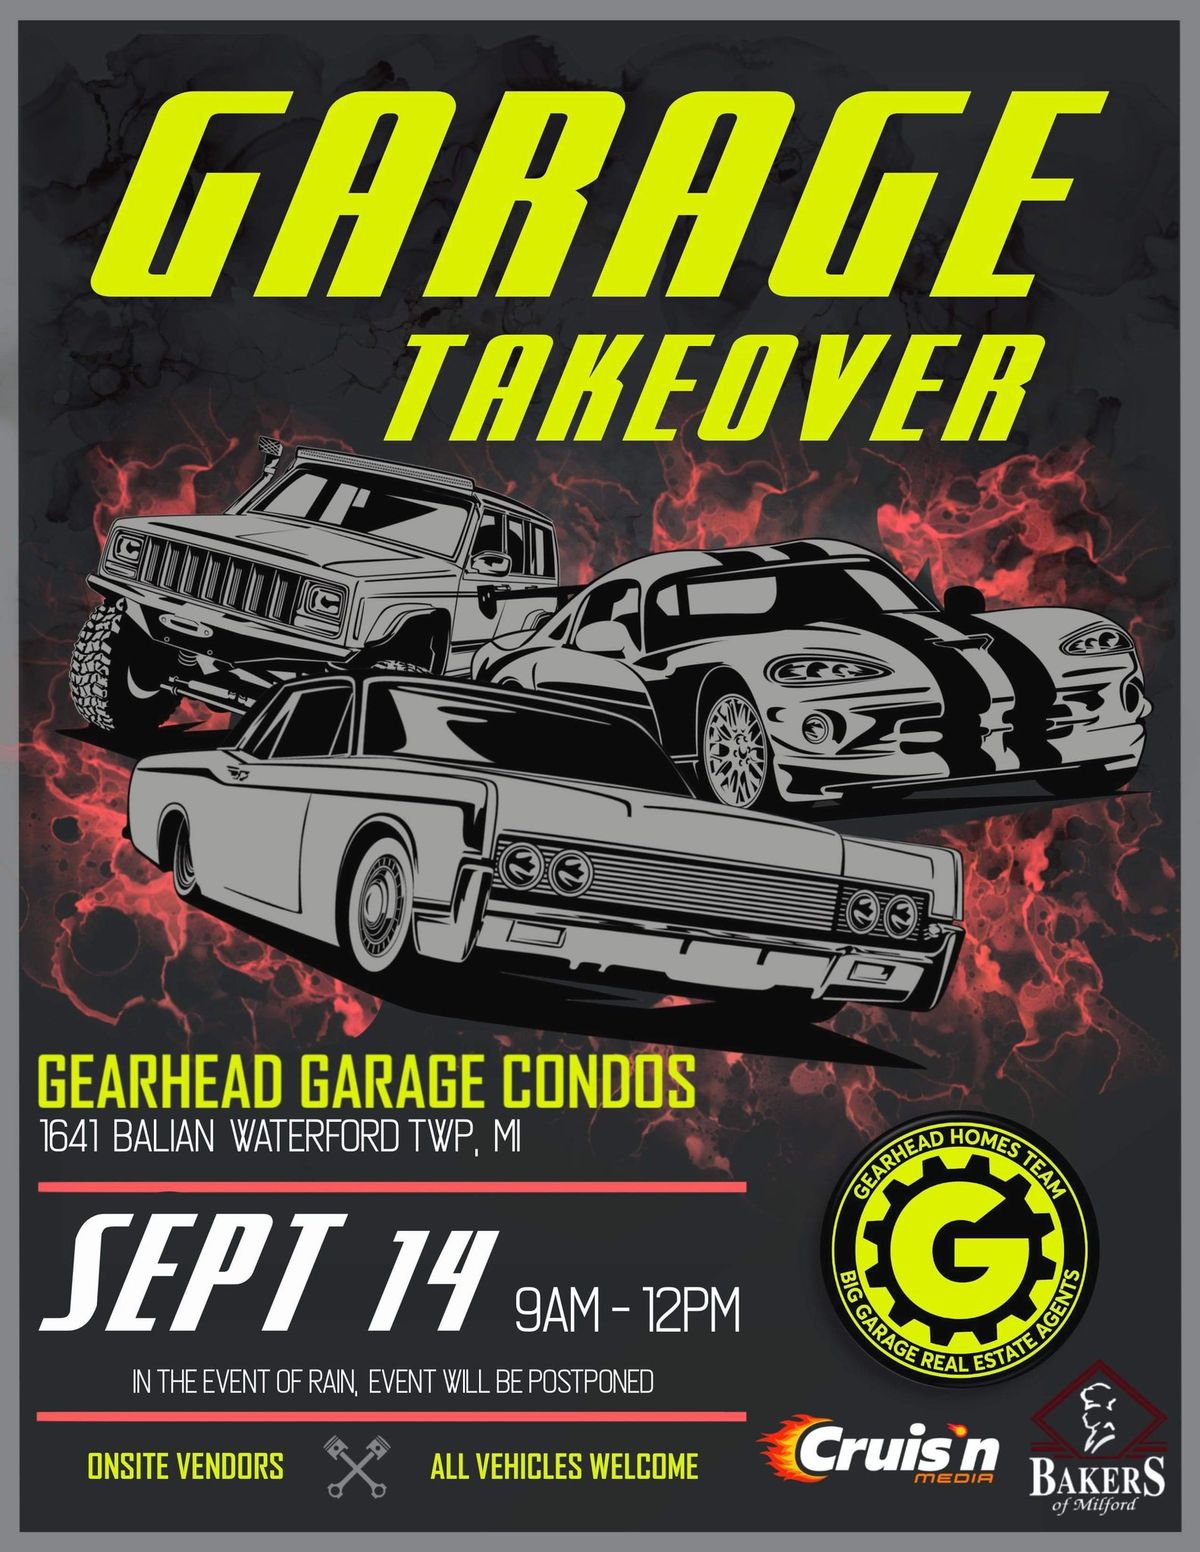 Garage Takeover - Cars & Coffee